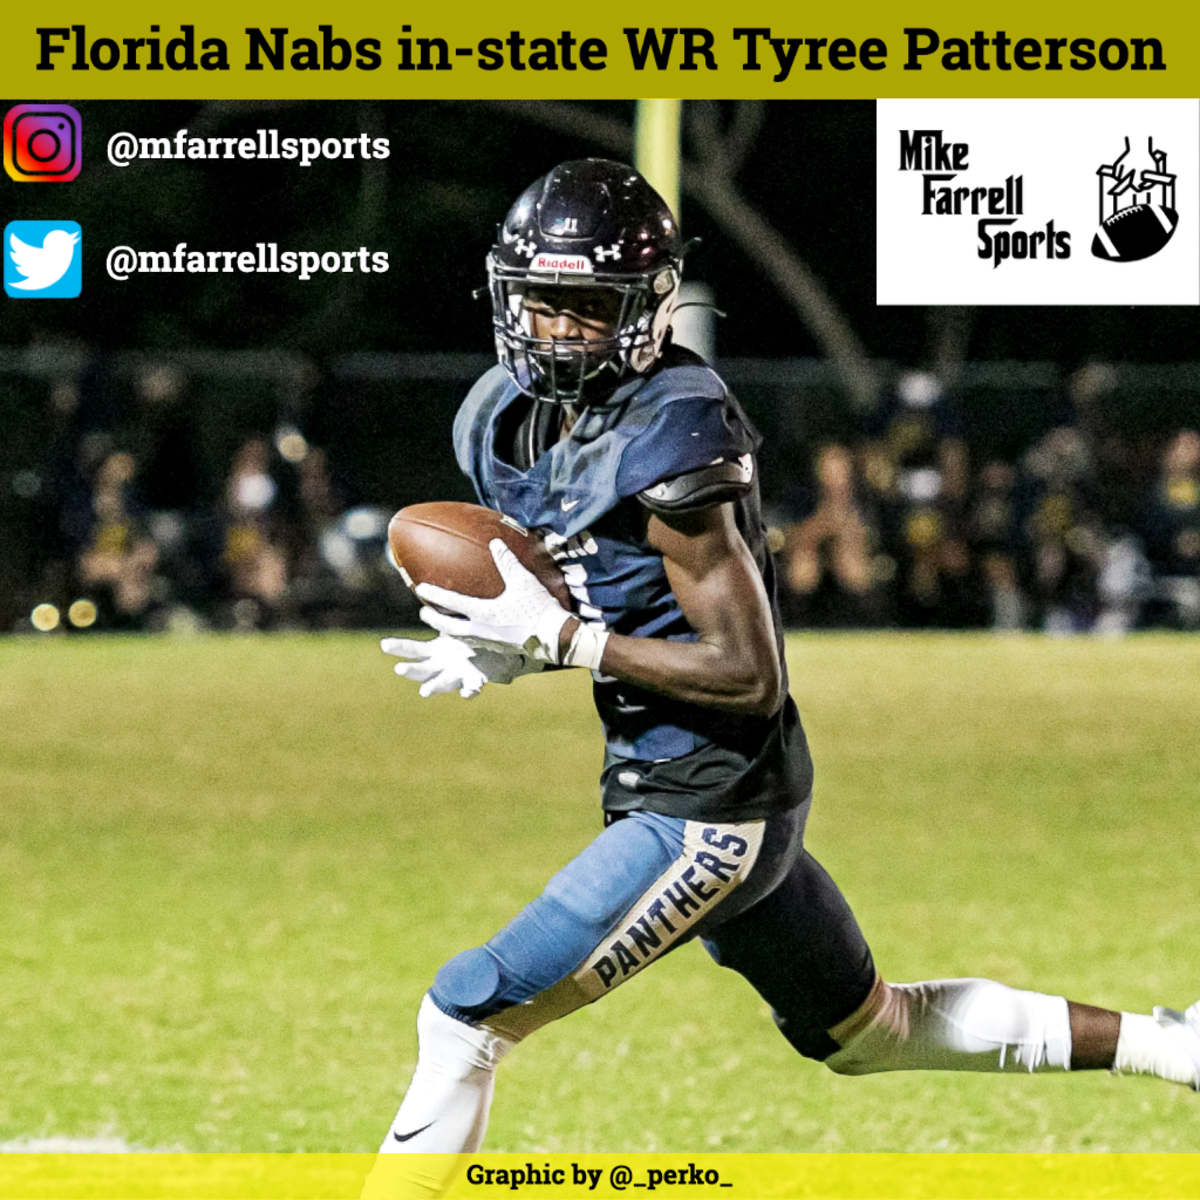 Commitment - Tyree Patterson